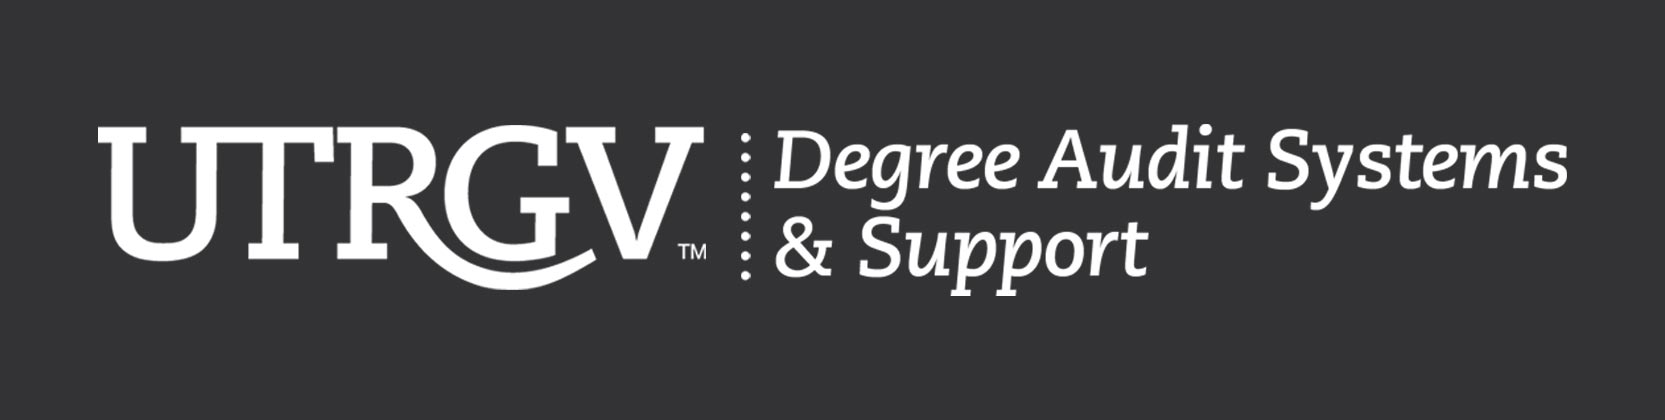 Degree Audit Systems and Support Logo